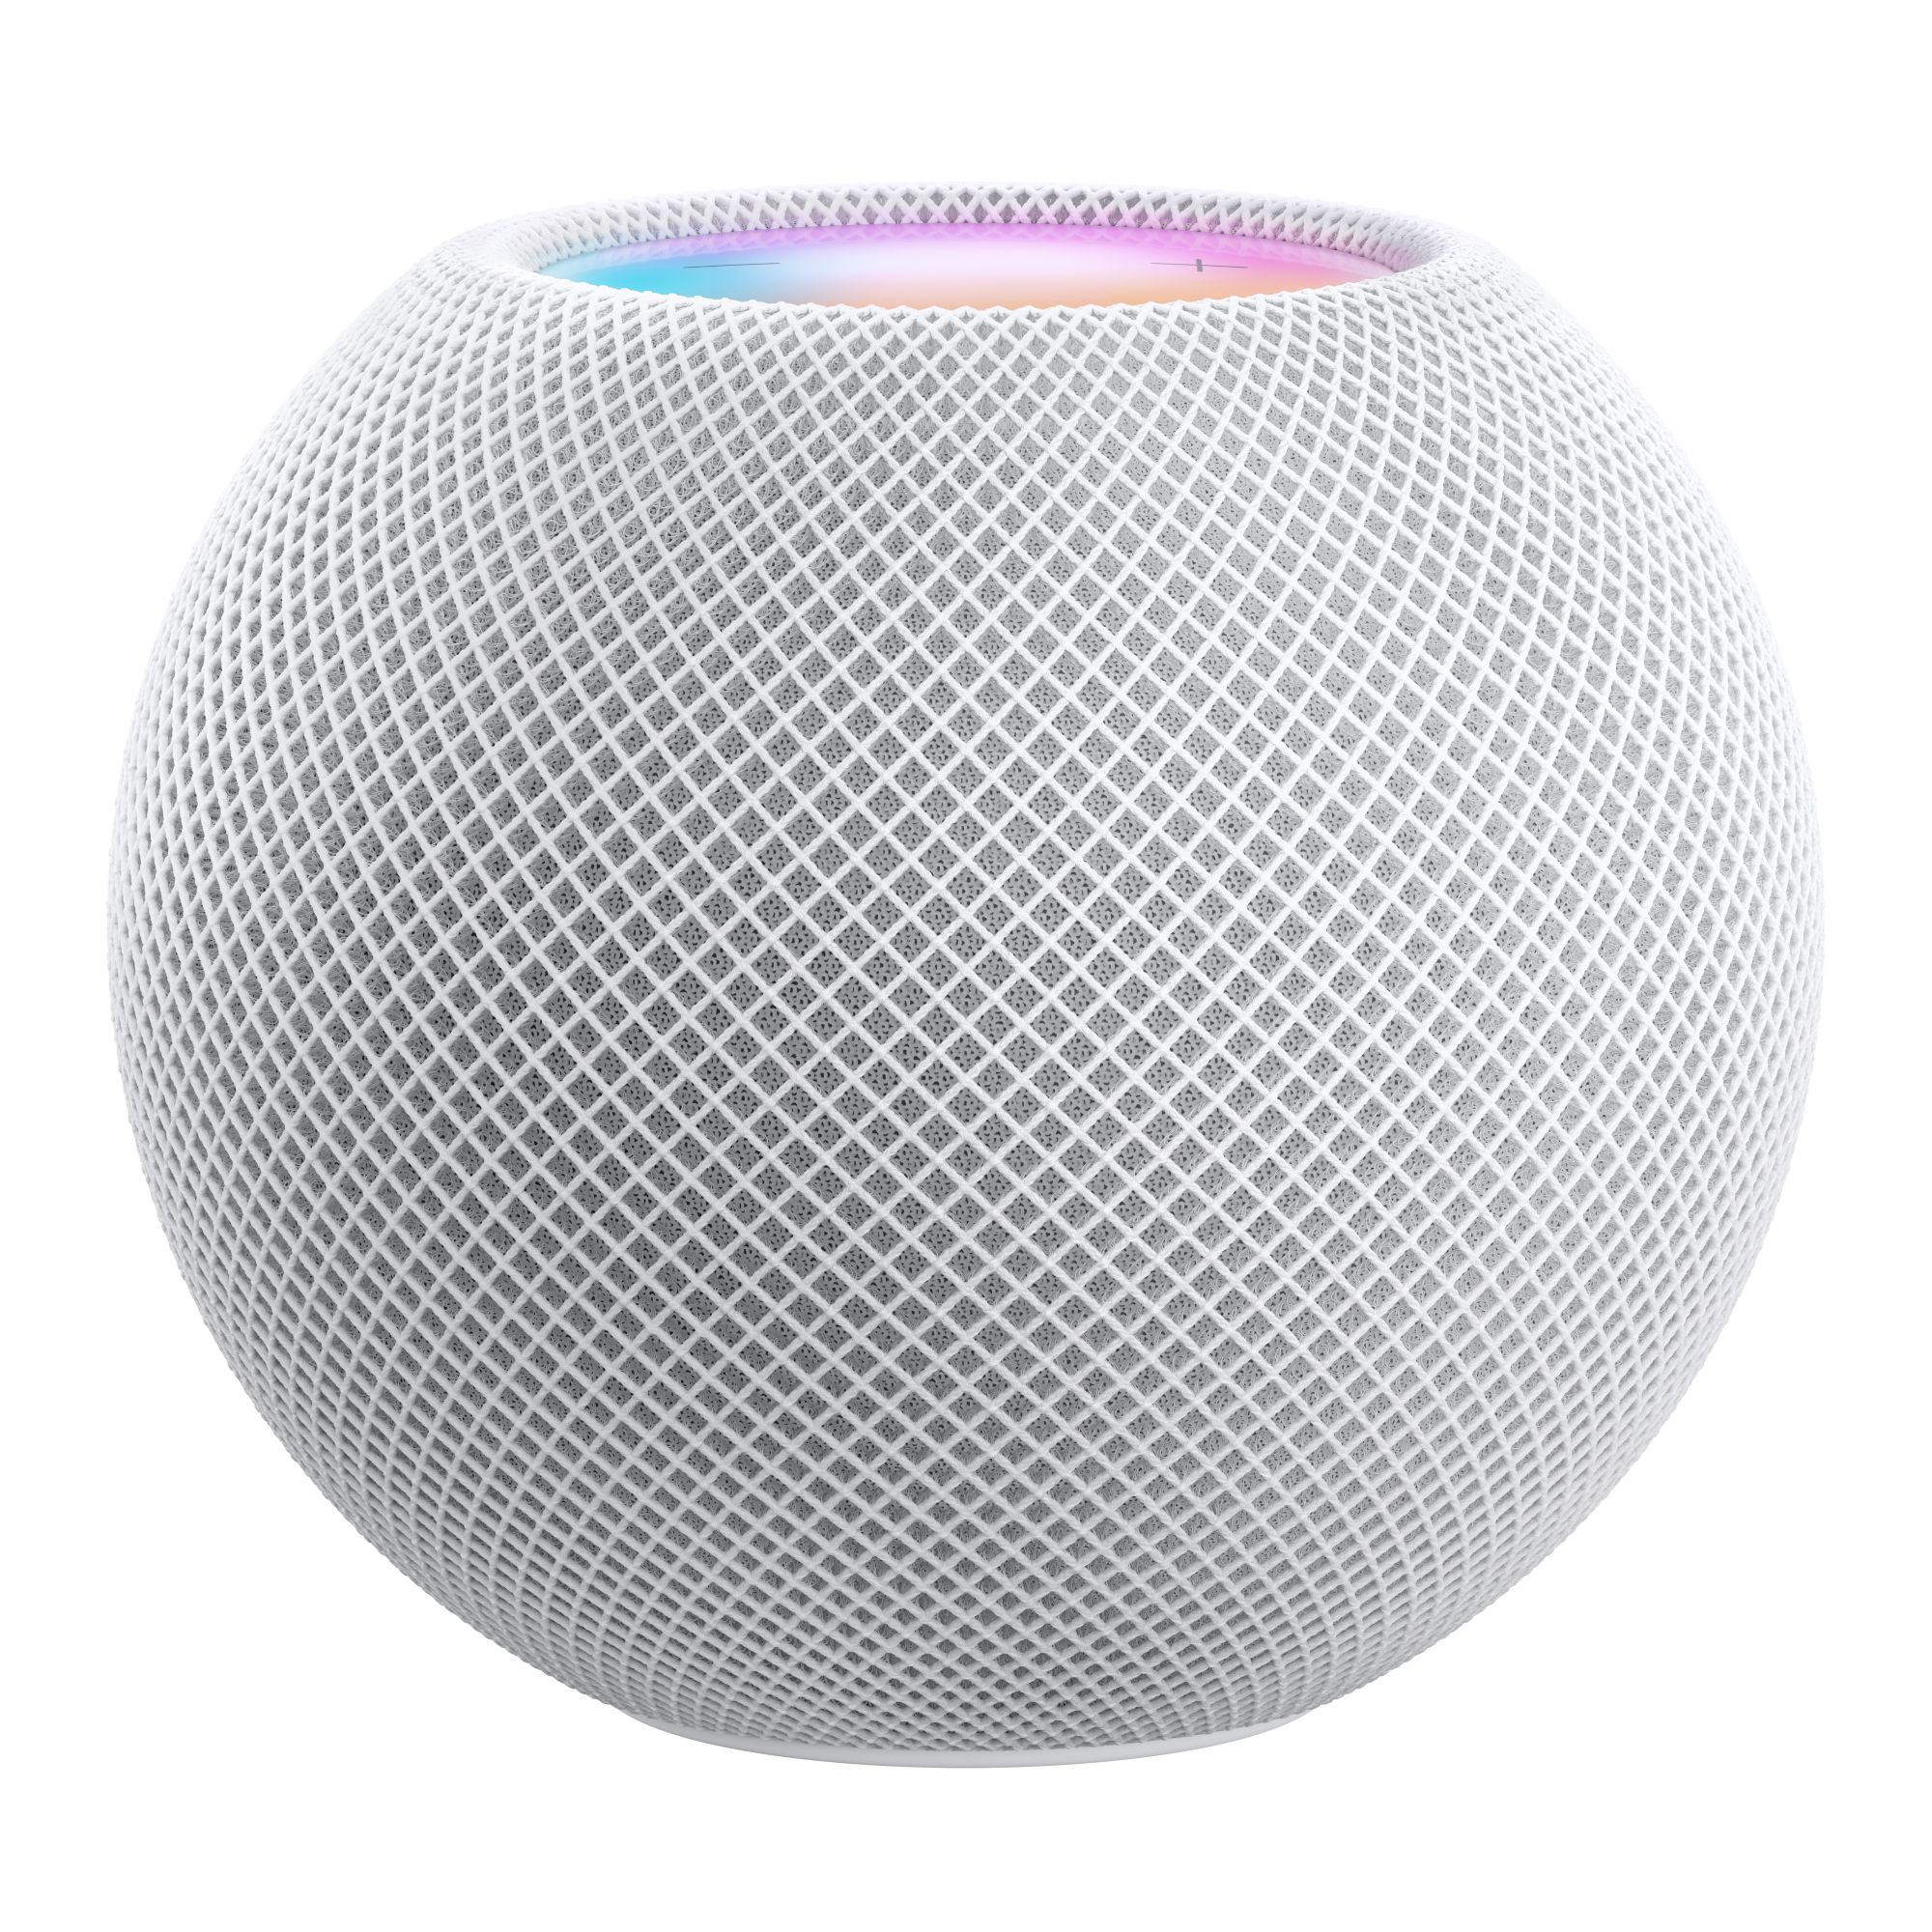 Apple HomePod mini and Charger - White | BJ's Wholesale Club